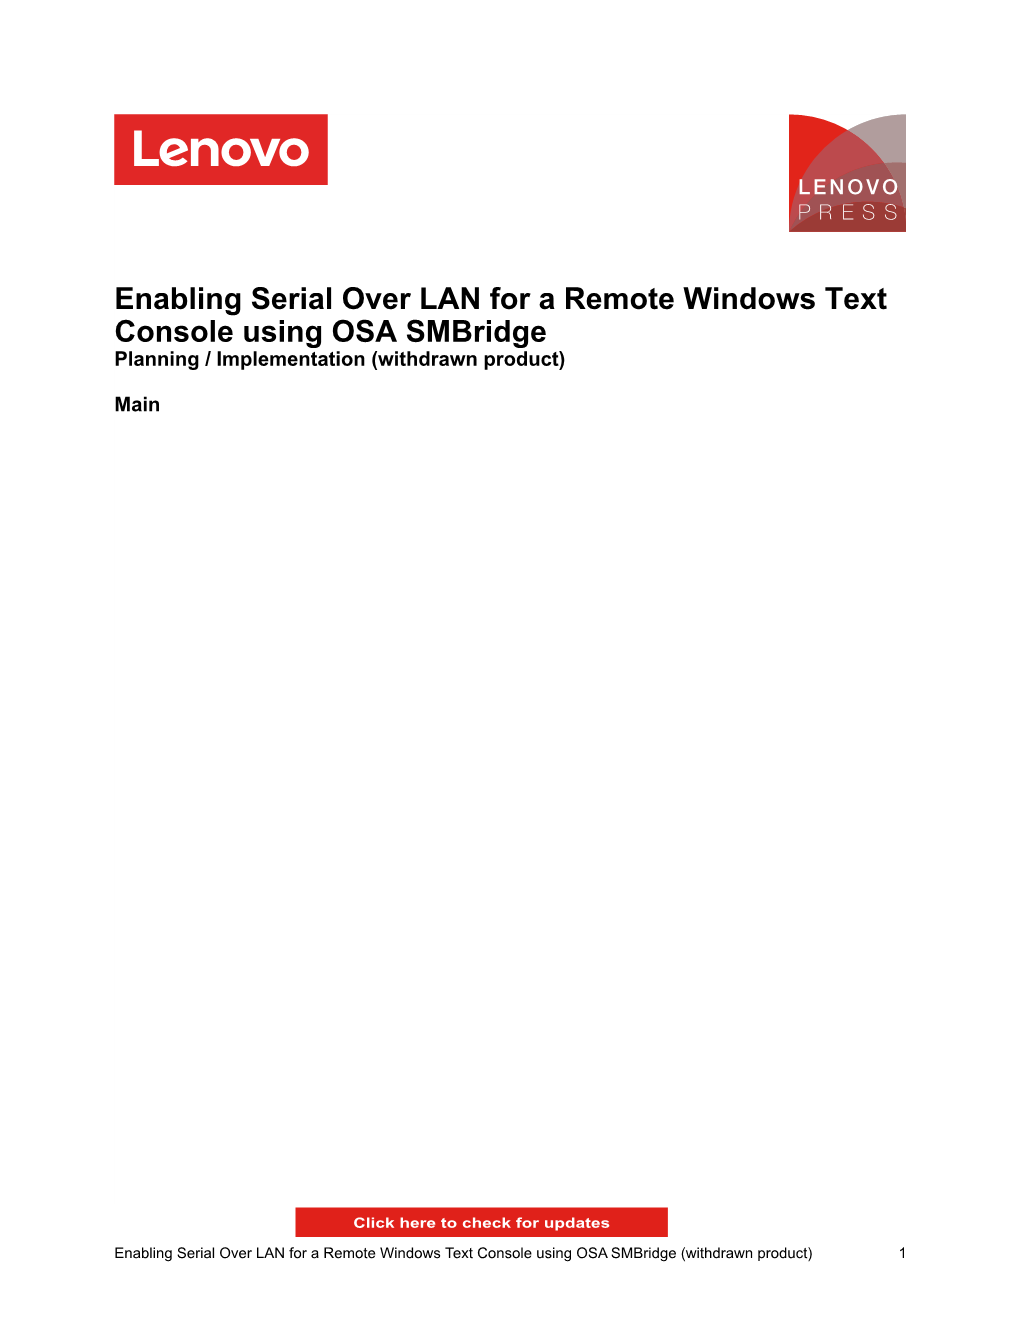 Enabling Serial Over LAN for a Remote Windows Text Console Using OSA Smbridge Planning / Implementation (Withdrawn Product)